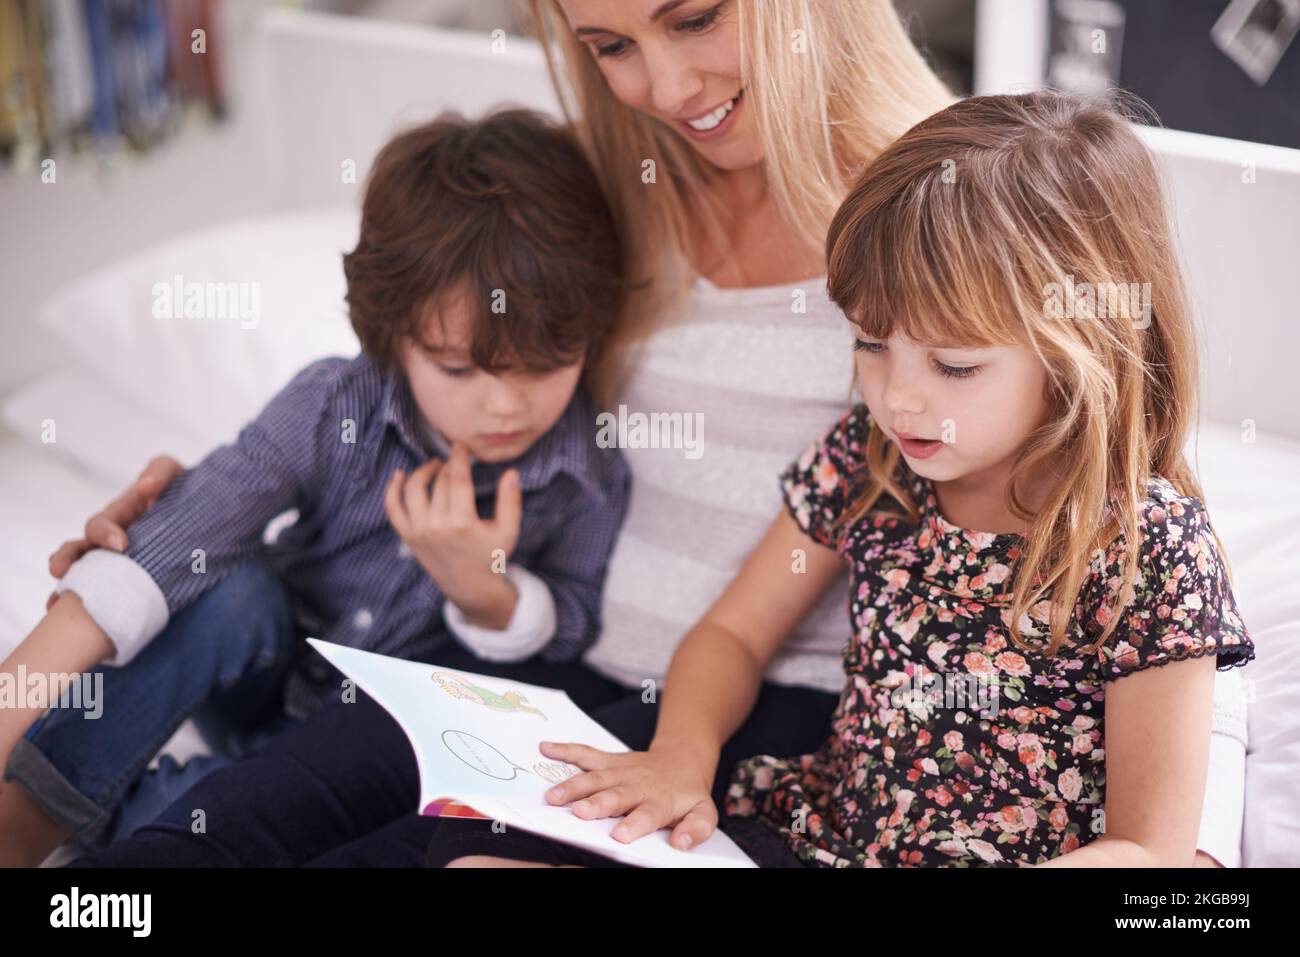 Family bonding time. a mother reading with her children at home. Stock Photo